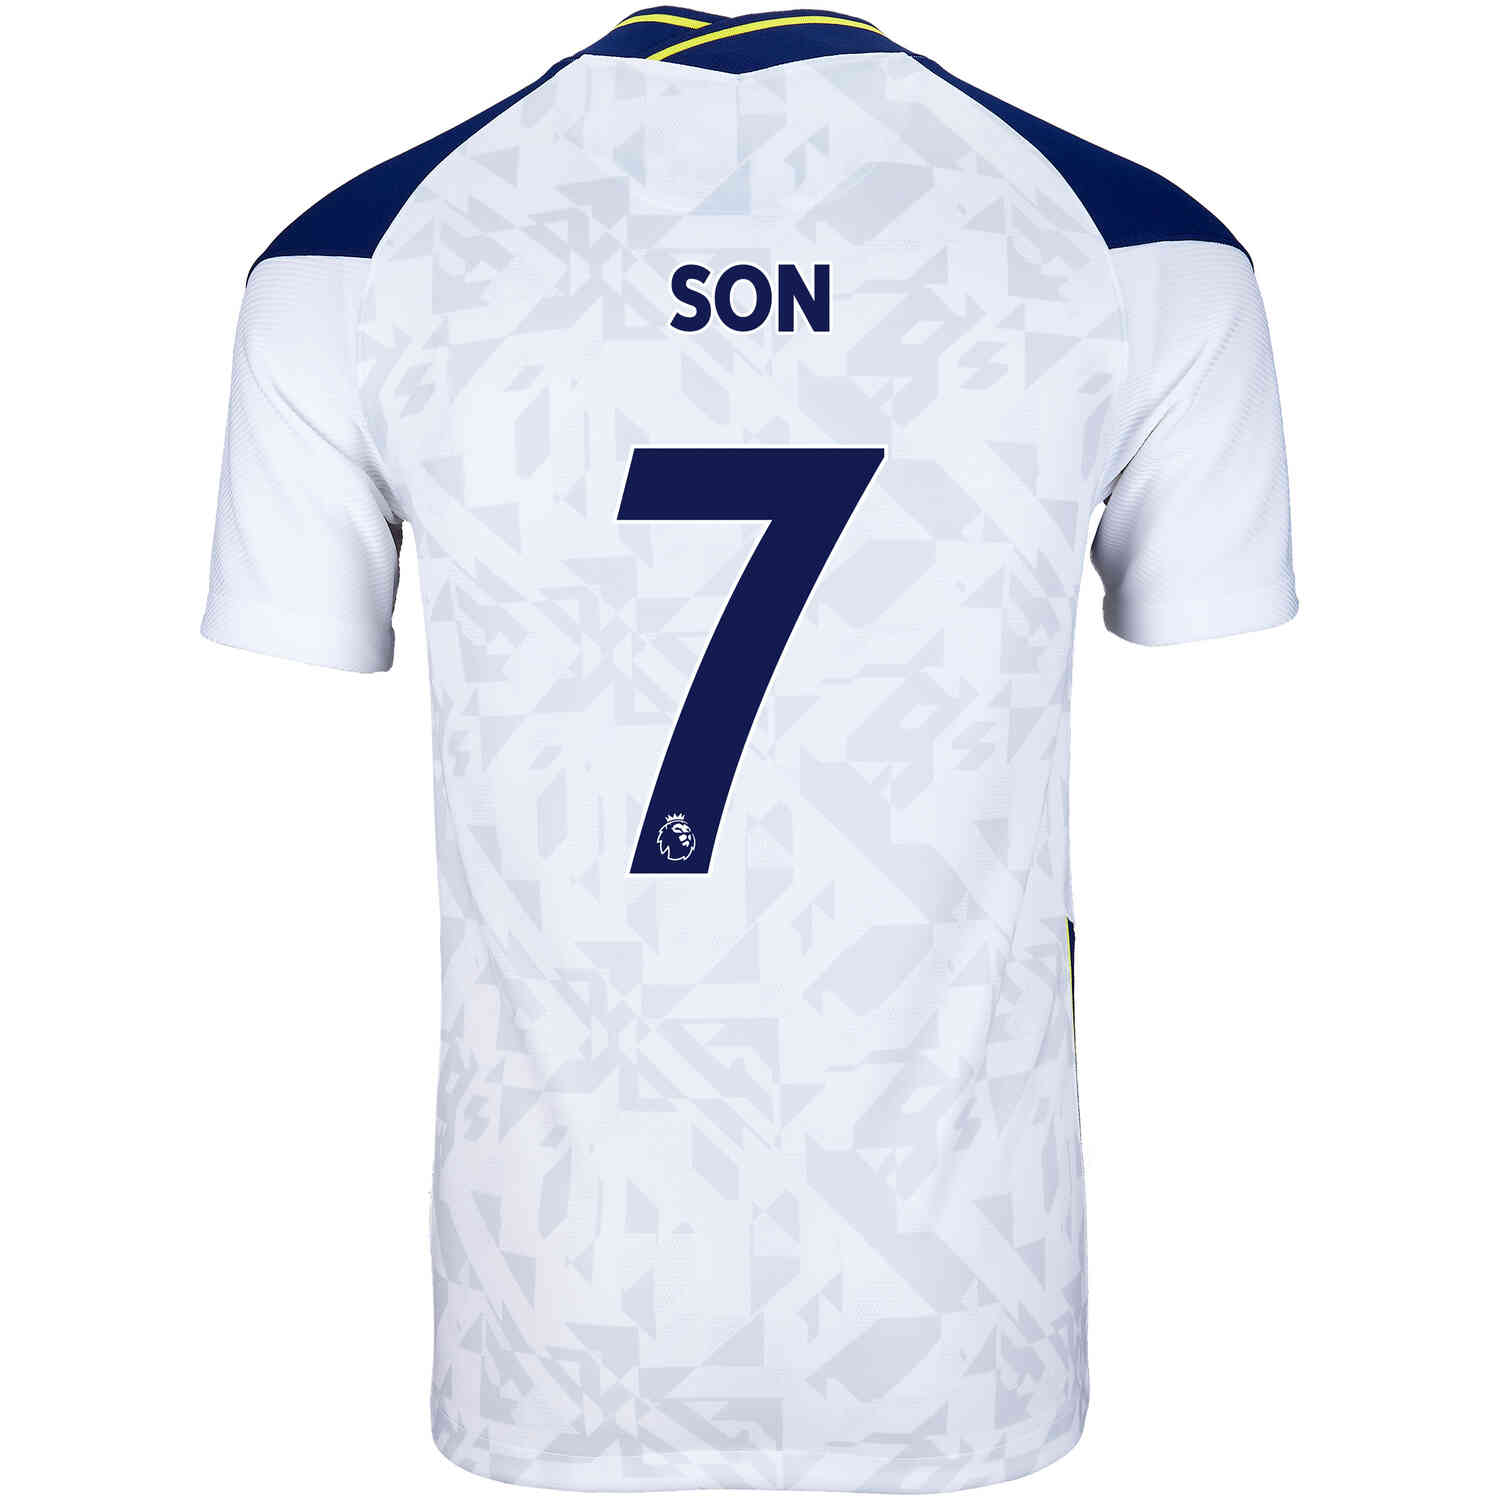 Nike Tottenham Hotspur Son 2020/21 Home Jersey Unboxing + Review 